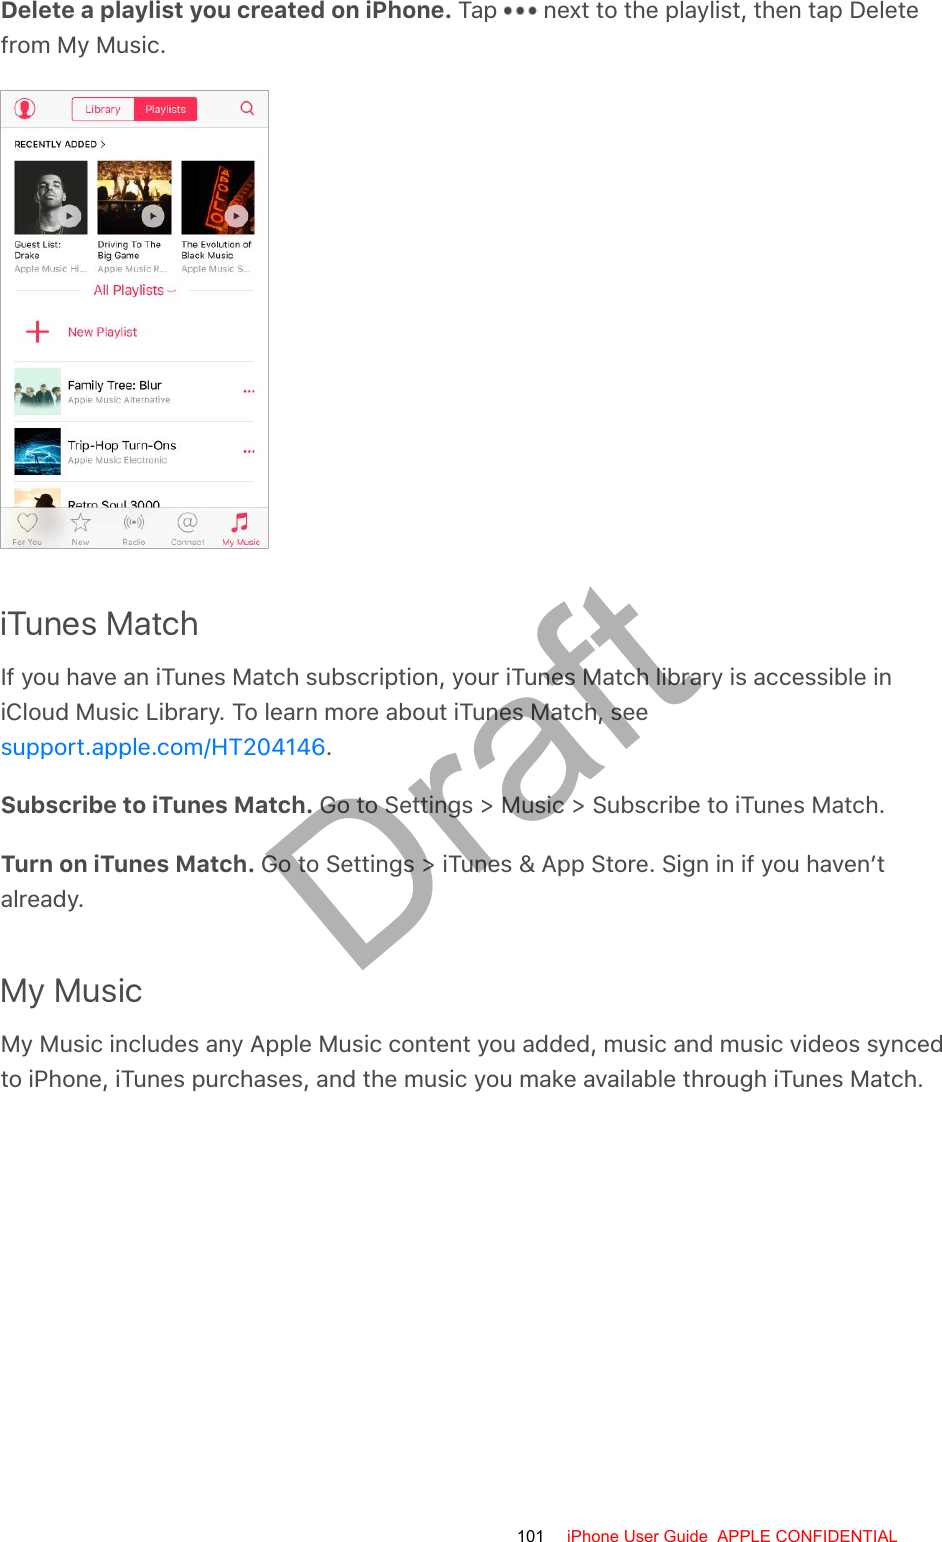 Delete a playlist you created on iPhone. Tap   next to the playlist, then tap Deletefrom My Music.iTunes MatchIf you have an iTunes Match subscription, your iTunes Match library is accessible iniCloud Music Library. To learn more about iTunes Match, see.Subscribe to iTunes Match. Go to Settings &gt; Music &gt; Subscribe to iTunes Match.Turn on iTunes Match. Go to Settings &gt; iTunes &amp; App Store. Sign in if you haven’talready.My MusicMy Music includes any Apple Music content you added, music and music videos syncedto iPhone, iTunes purchases, and the music you make available through iTunes Match.support.apple.com/HT204146101 iPhone User Guide  APPLE CONFIDENTIALDraft